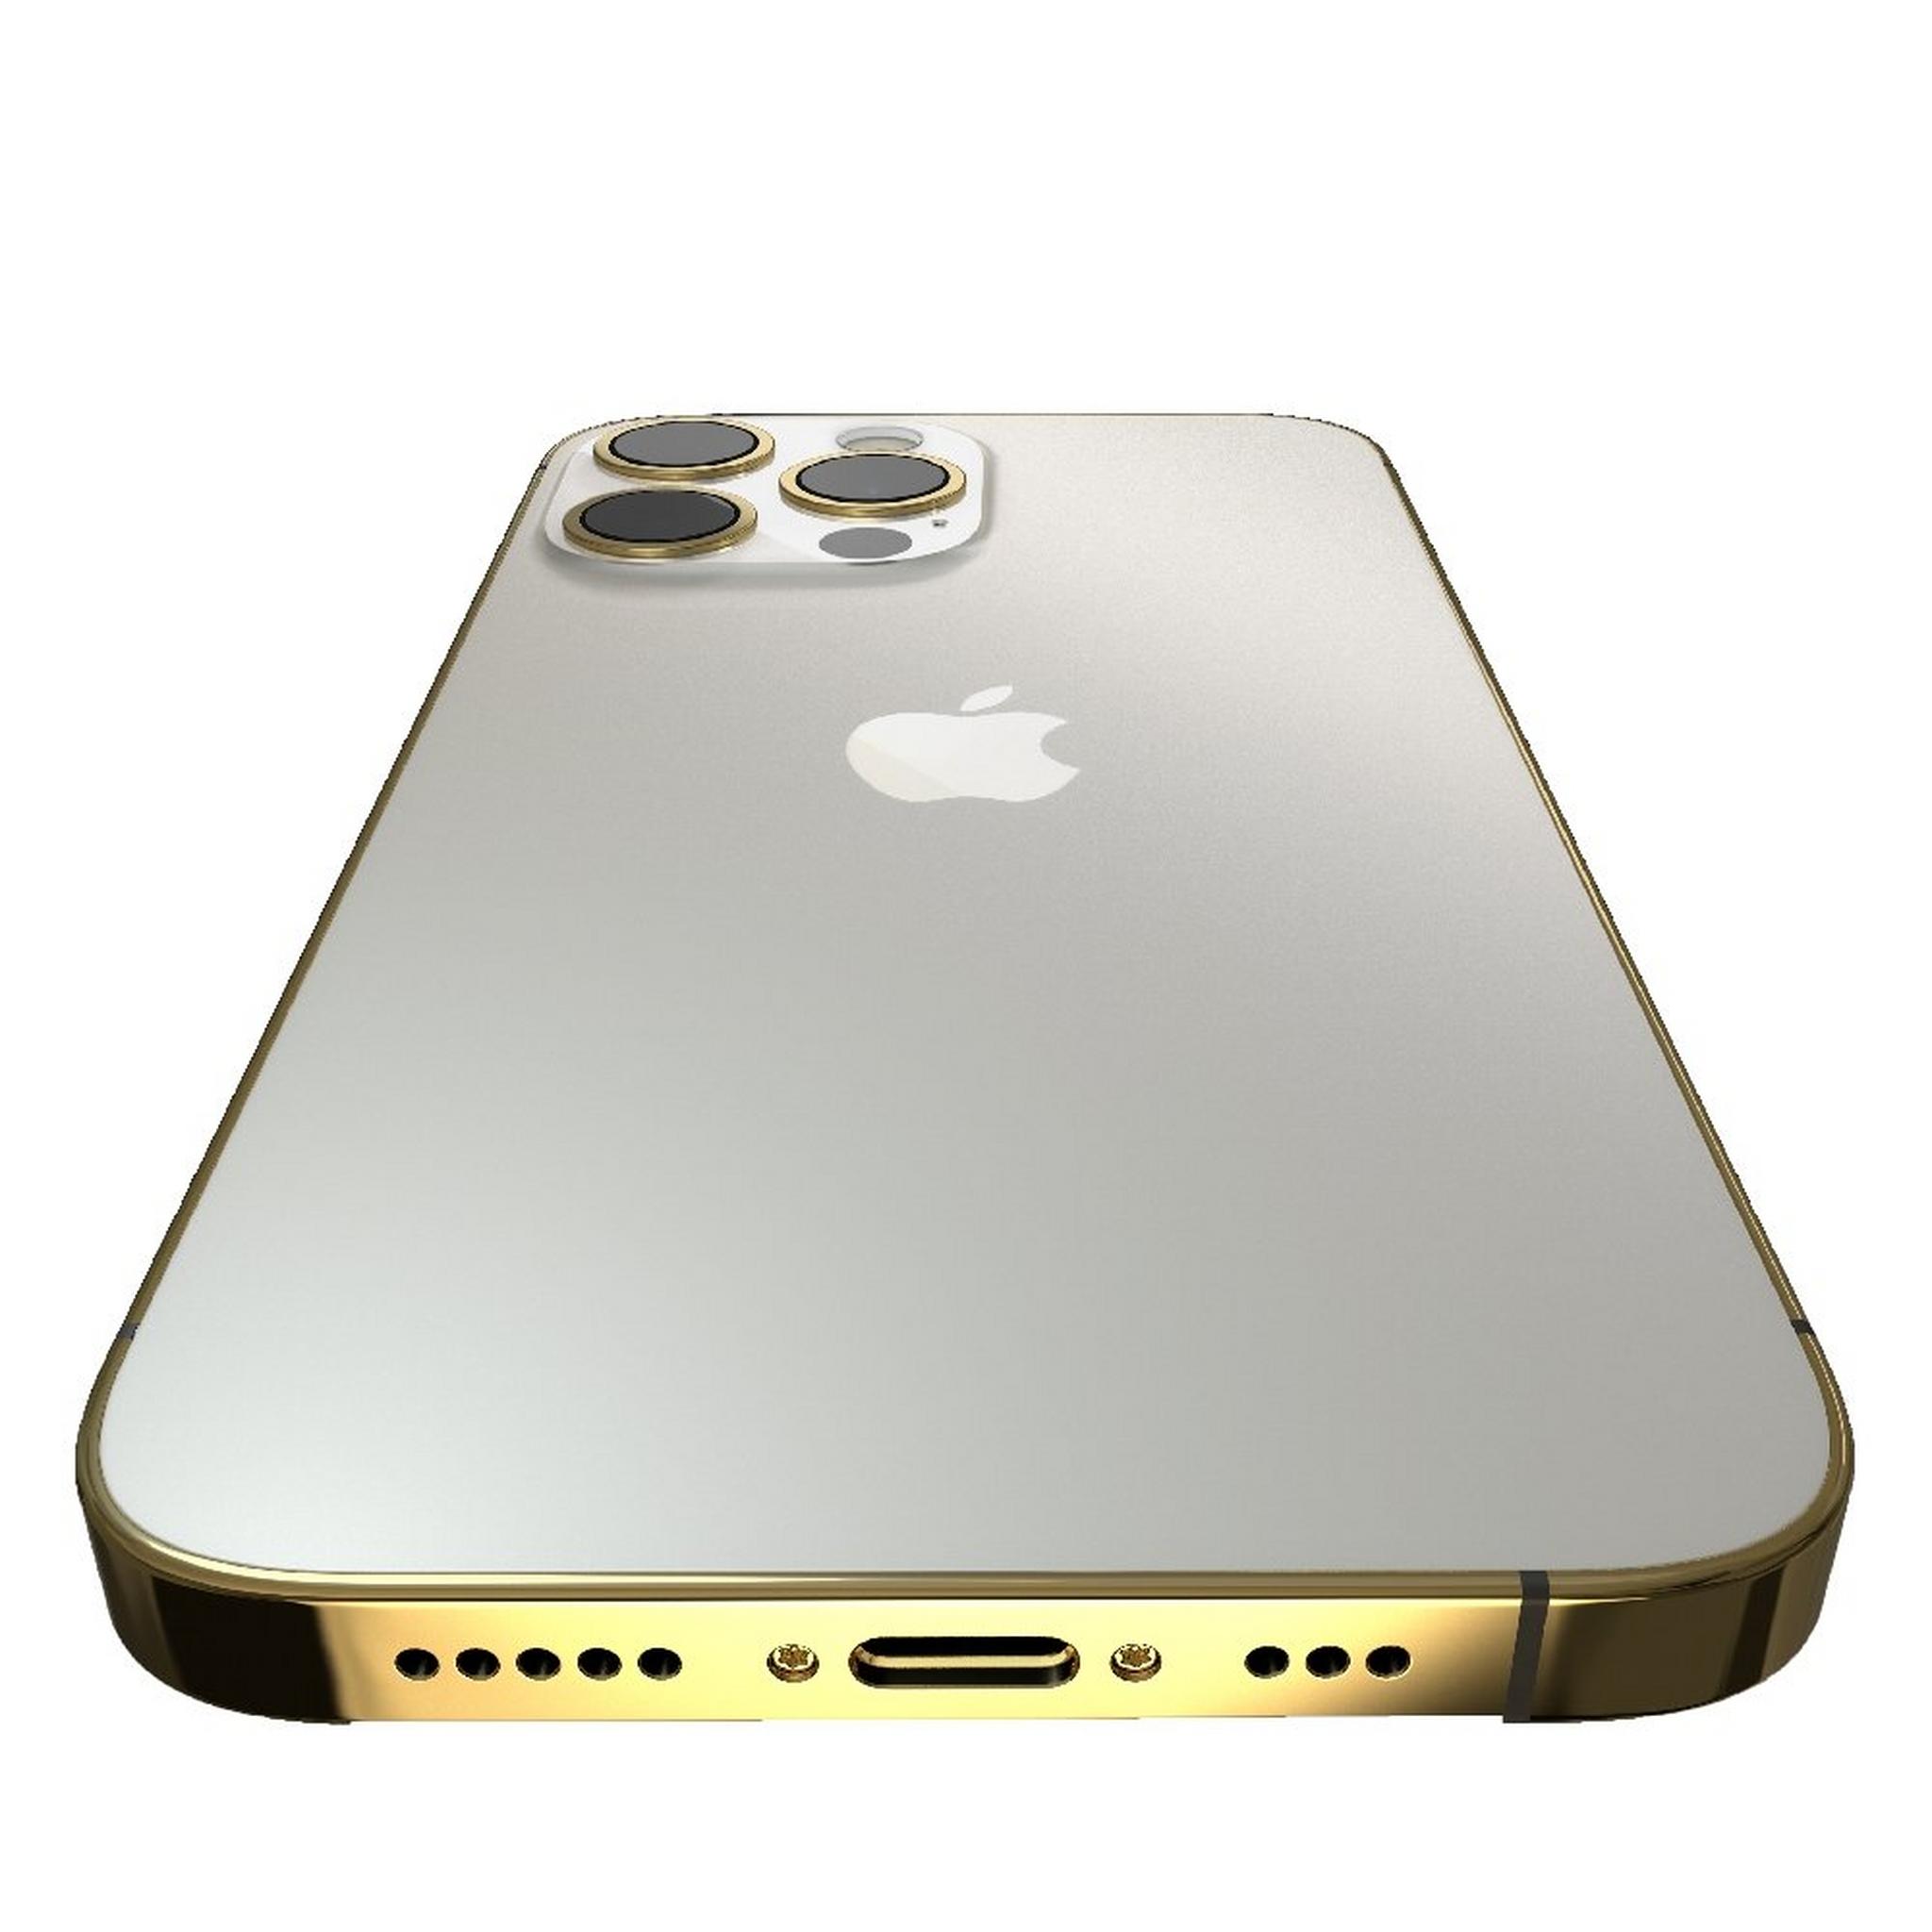 Givori iPhone 13 Pro 256GB Gold Plated Frame - Silver